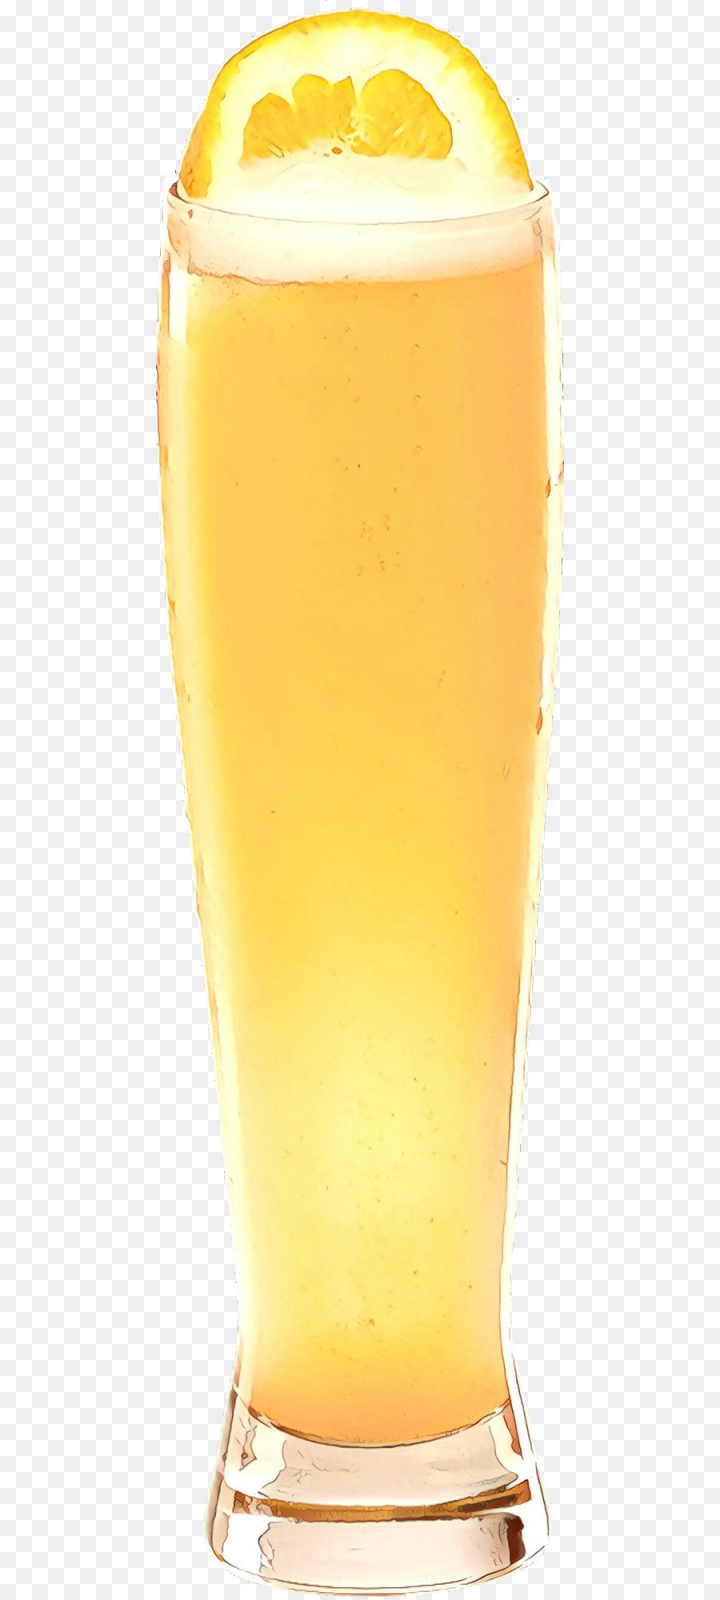  cartoon,drink,yellow,juice,pint glass,beer glass,alcoholic beverage,bellini,champagne cocktail,fizz,beer,png